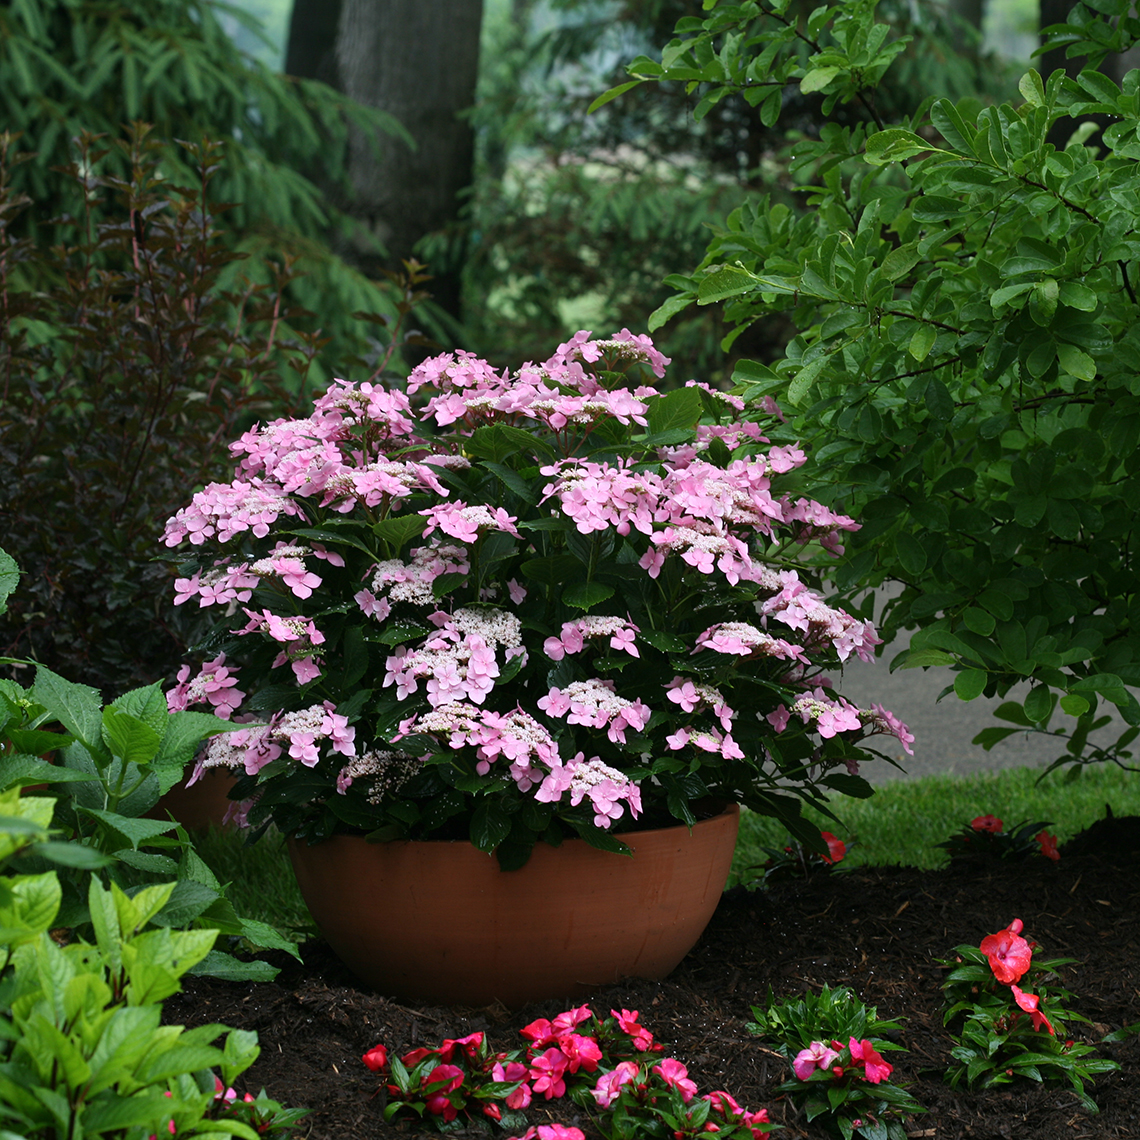 Lets Dance Starlight hydrangea blooming ina container in a shady garden bed